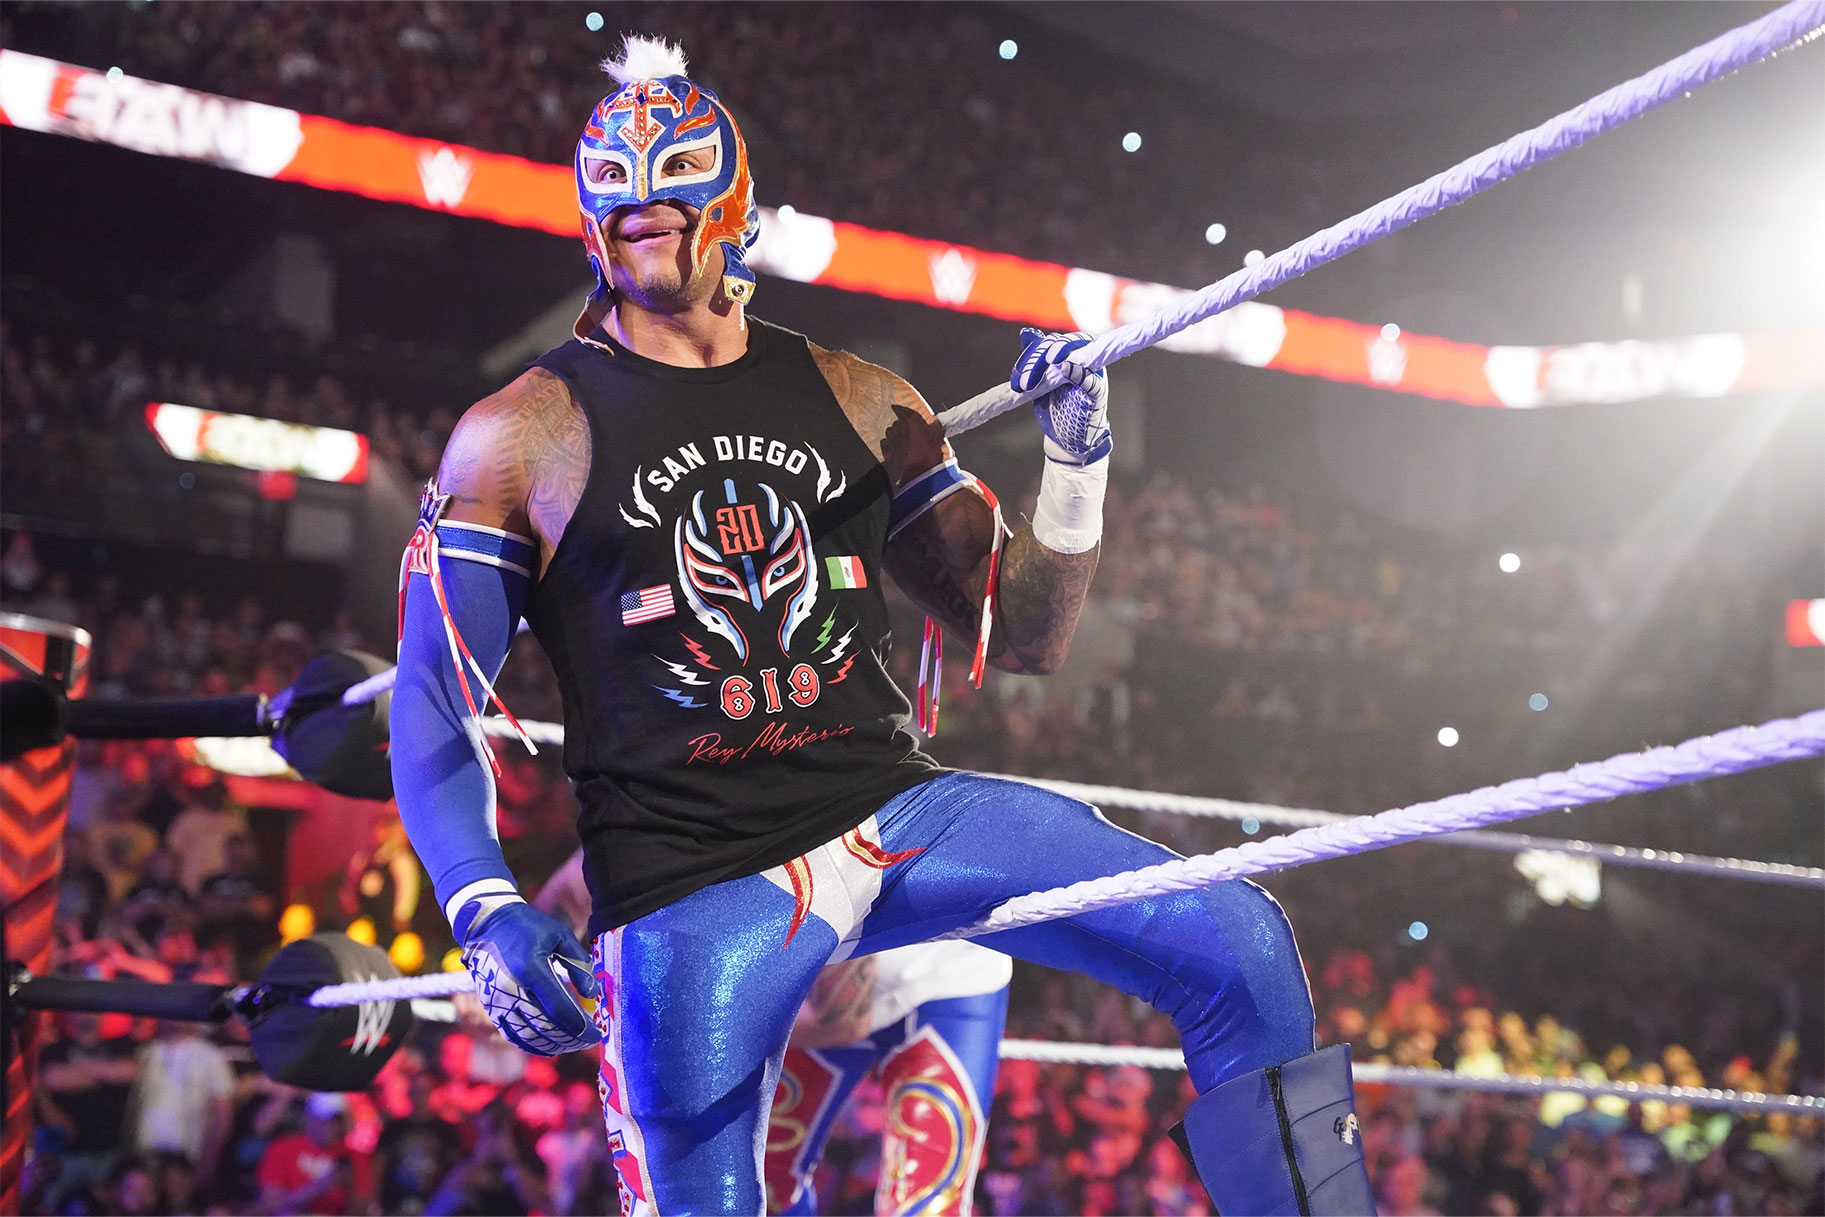 Rey Mysterio Achieved a Unique WWE Milestone during Last Night’s RAW Event